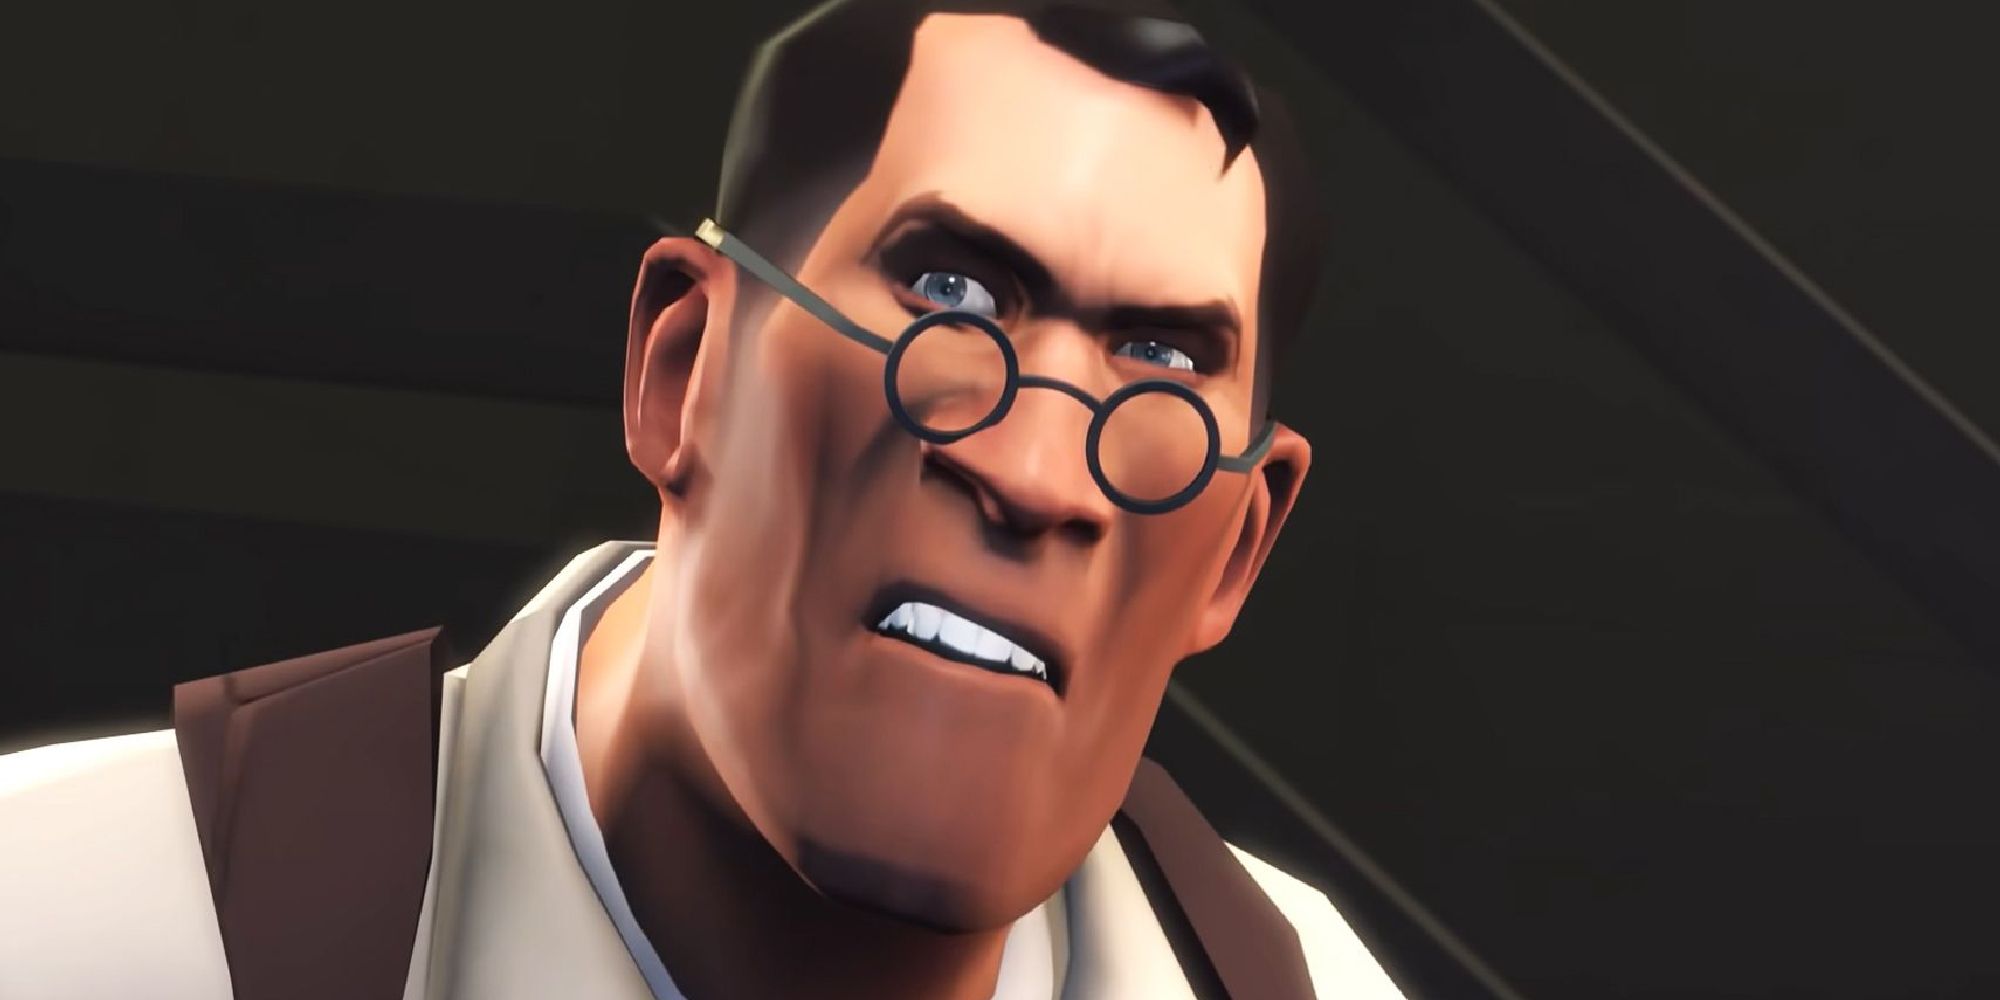 Team Fortress 2 Porn - Team Fortress 2 Actor Will Contact Valve About Botting Issue